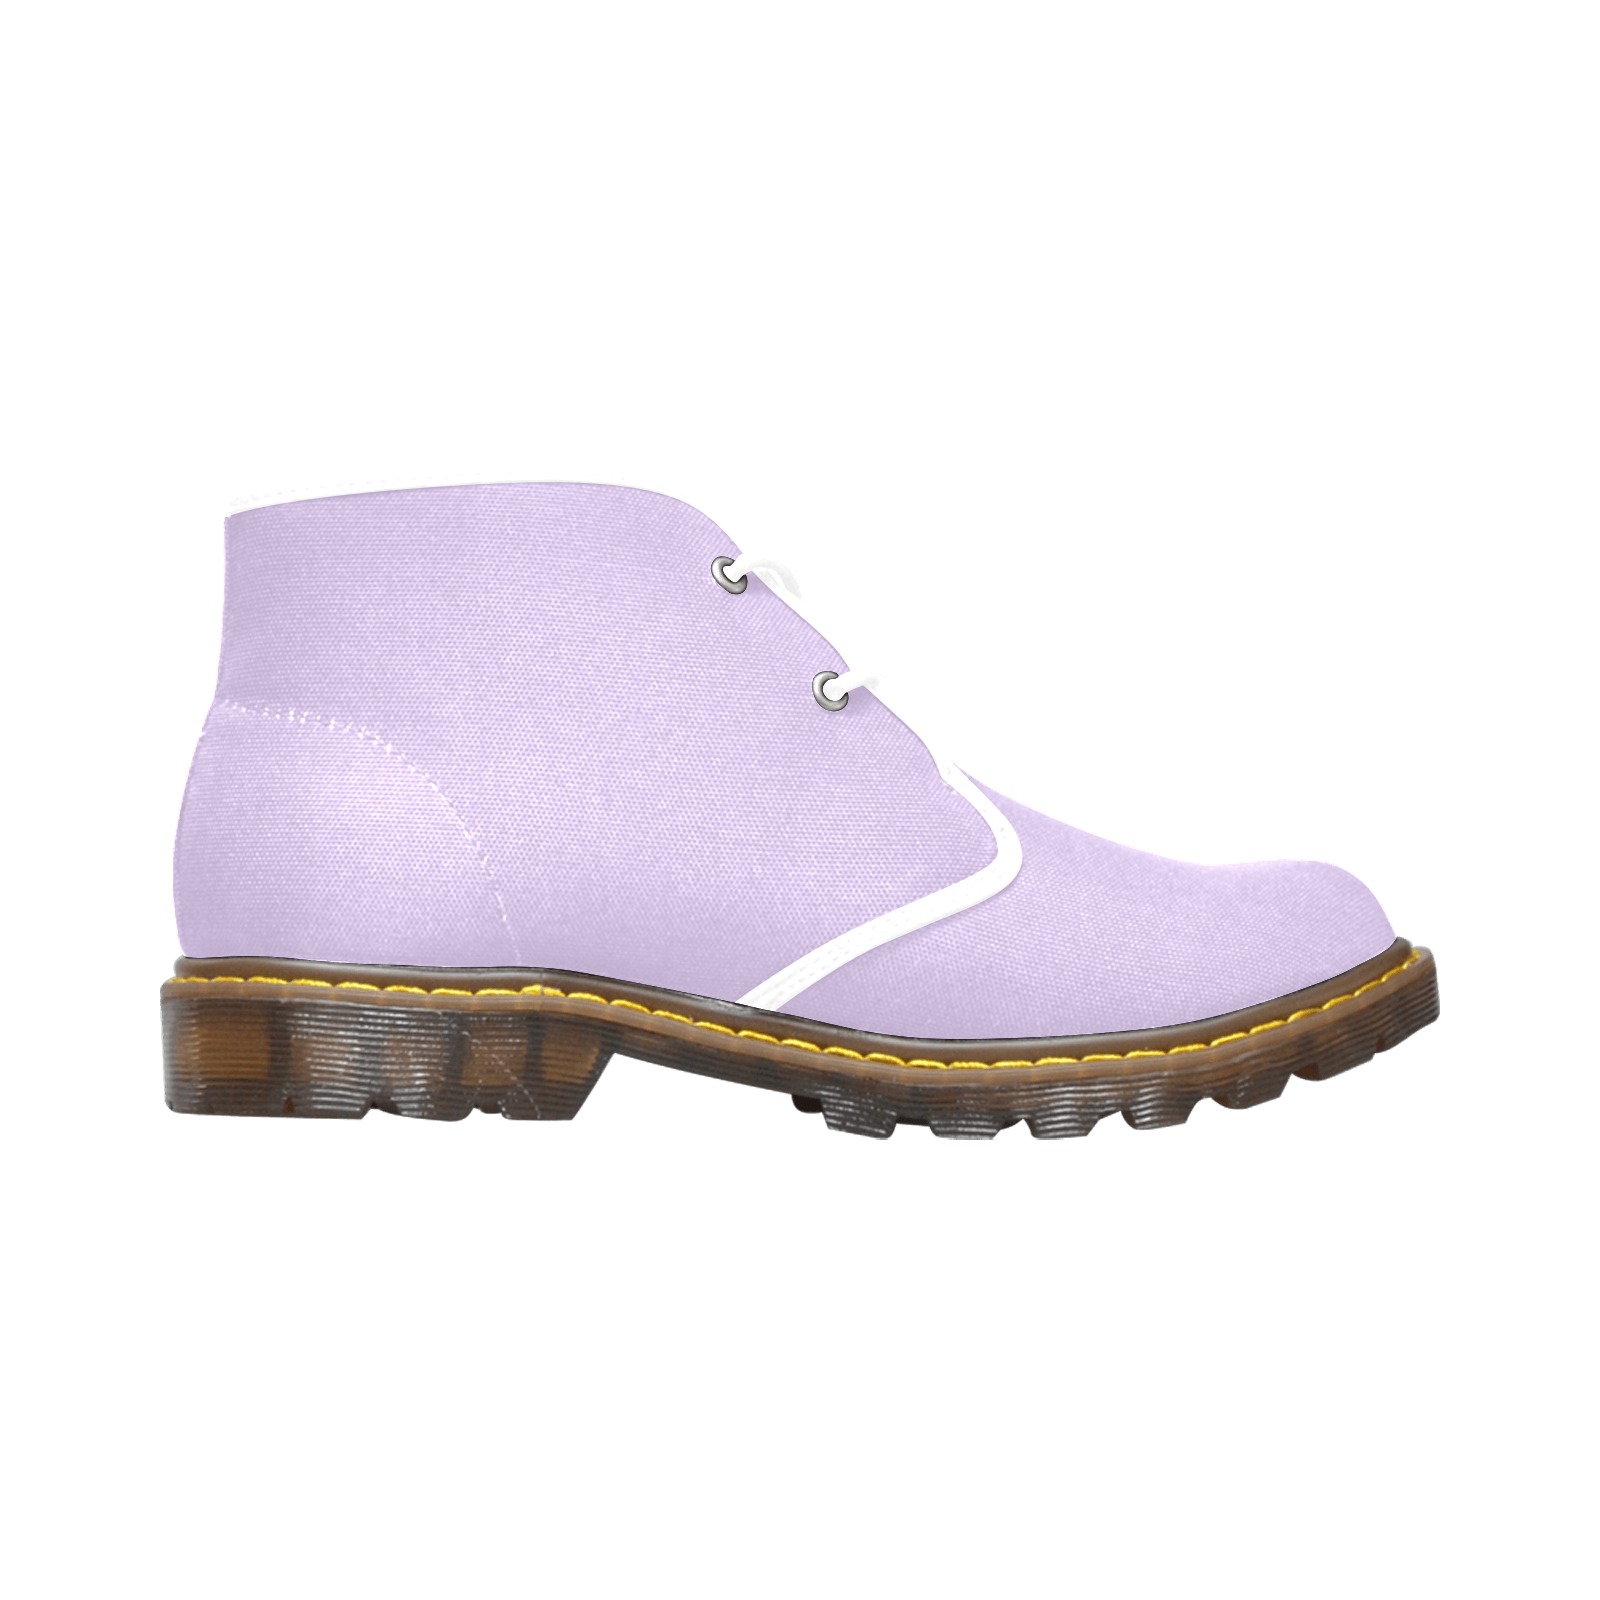 Orchid Bloom Women's Canvas Chukka Boots (Model 2402-1)